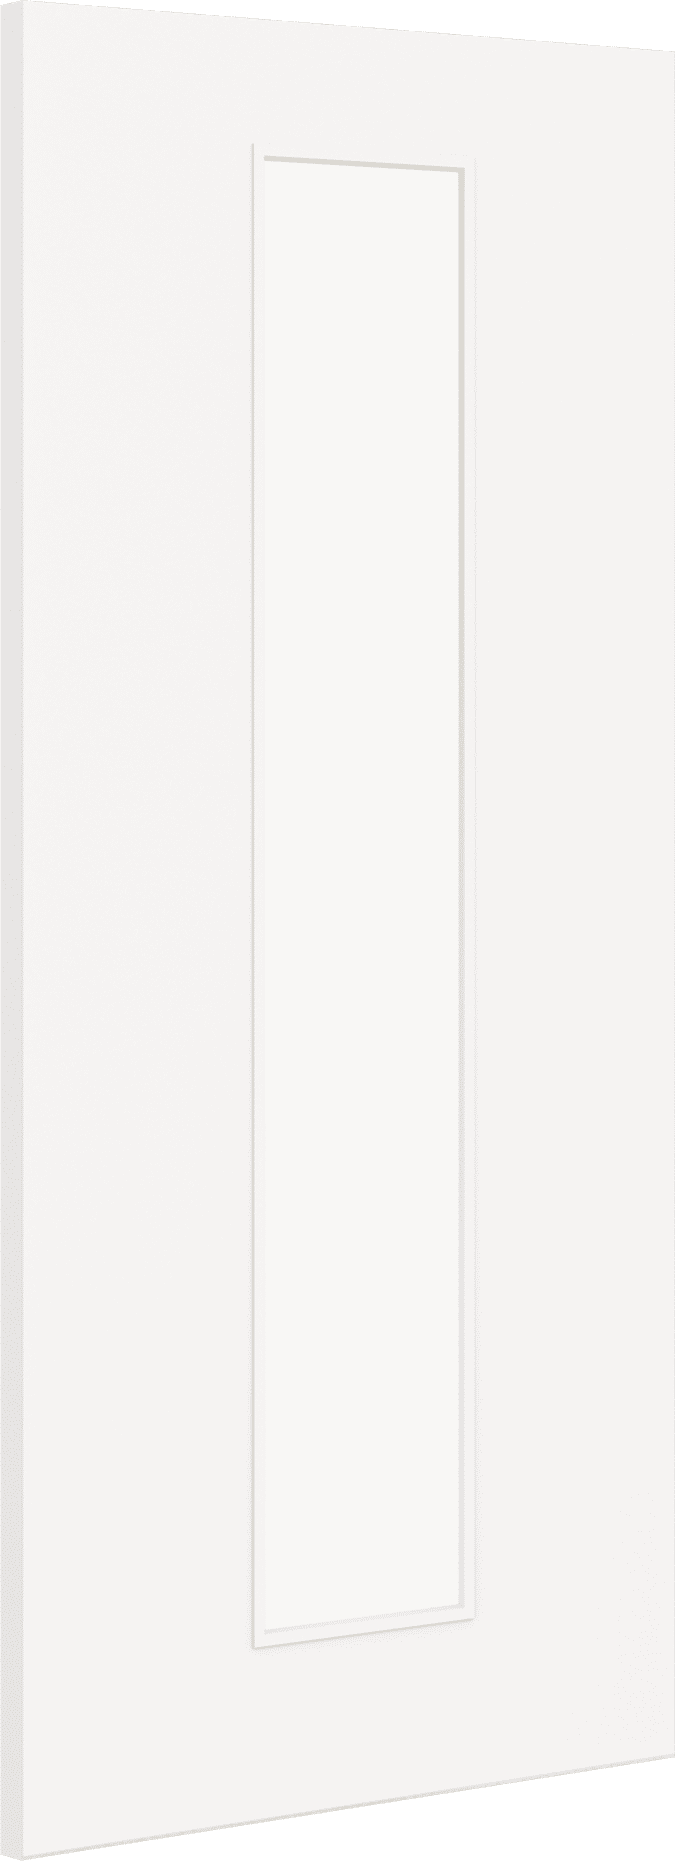 1981mm x 533mm x 44mm (21") Architectural Paint Grade White 10 Clear Glazed Fire Door Blank